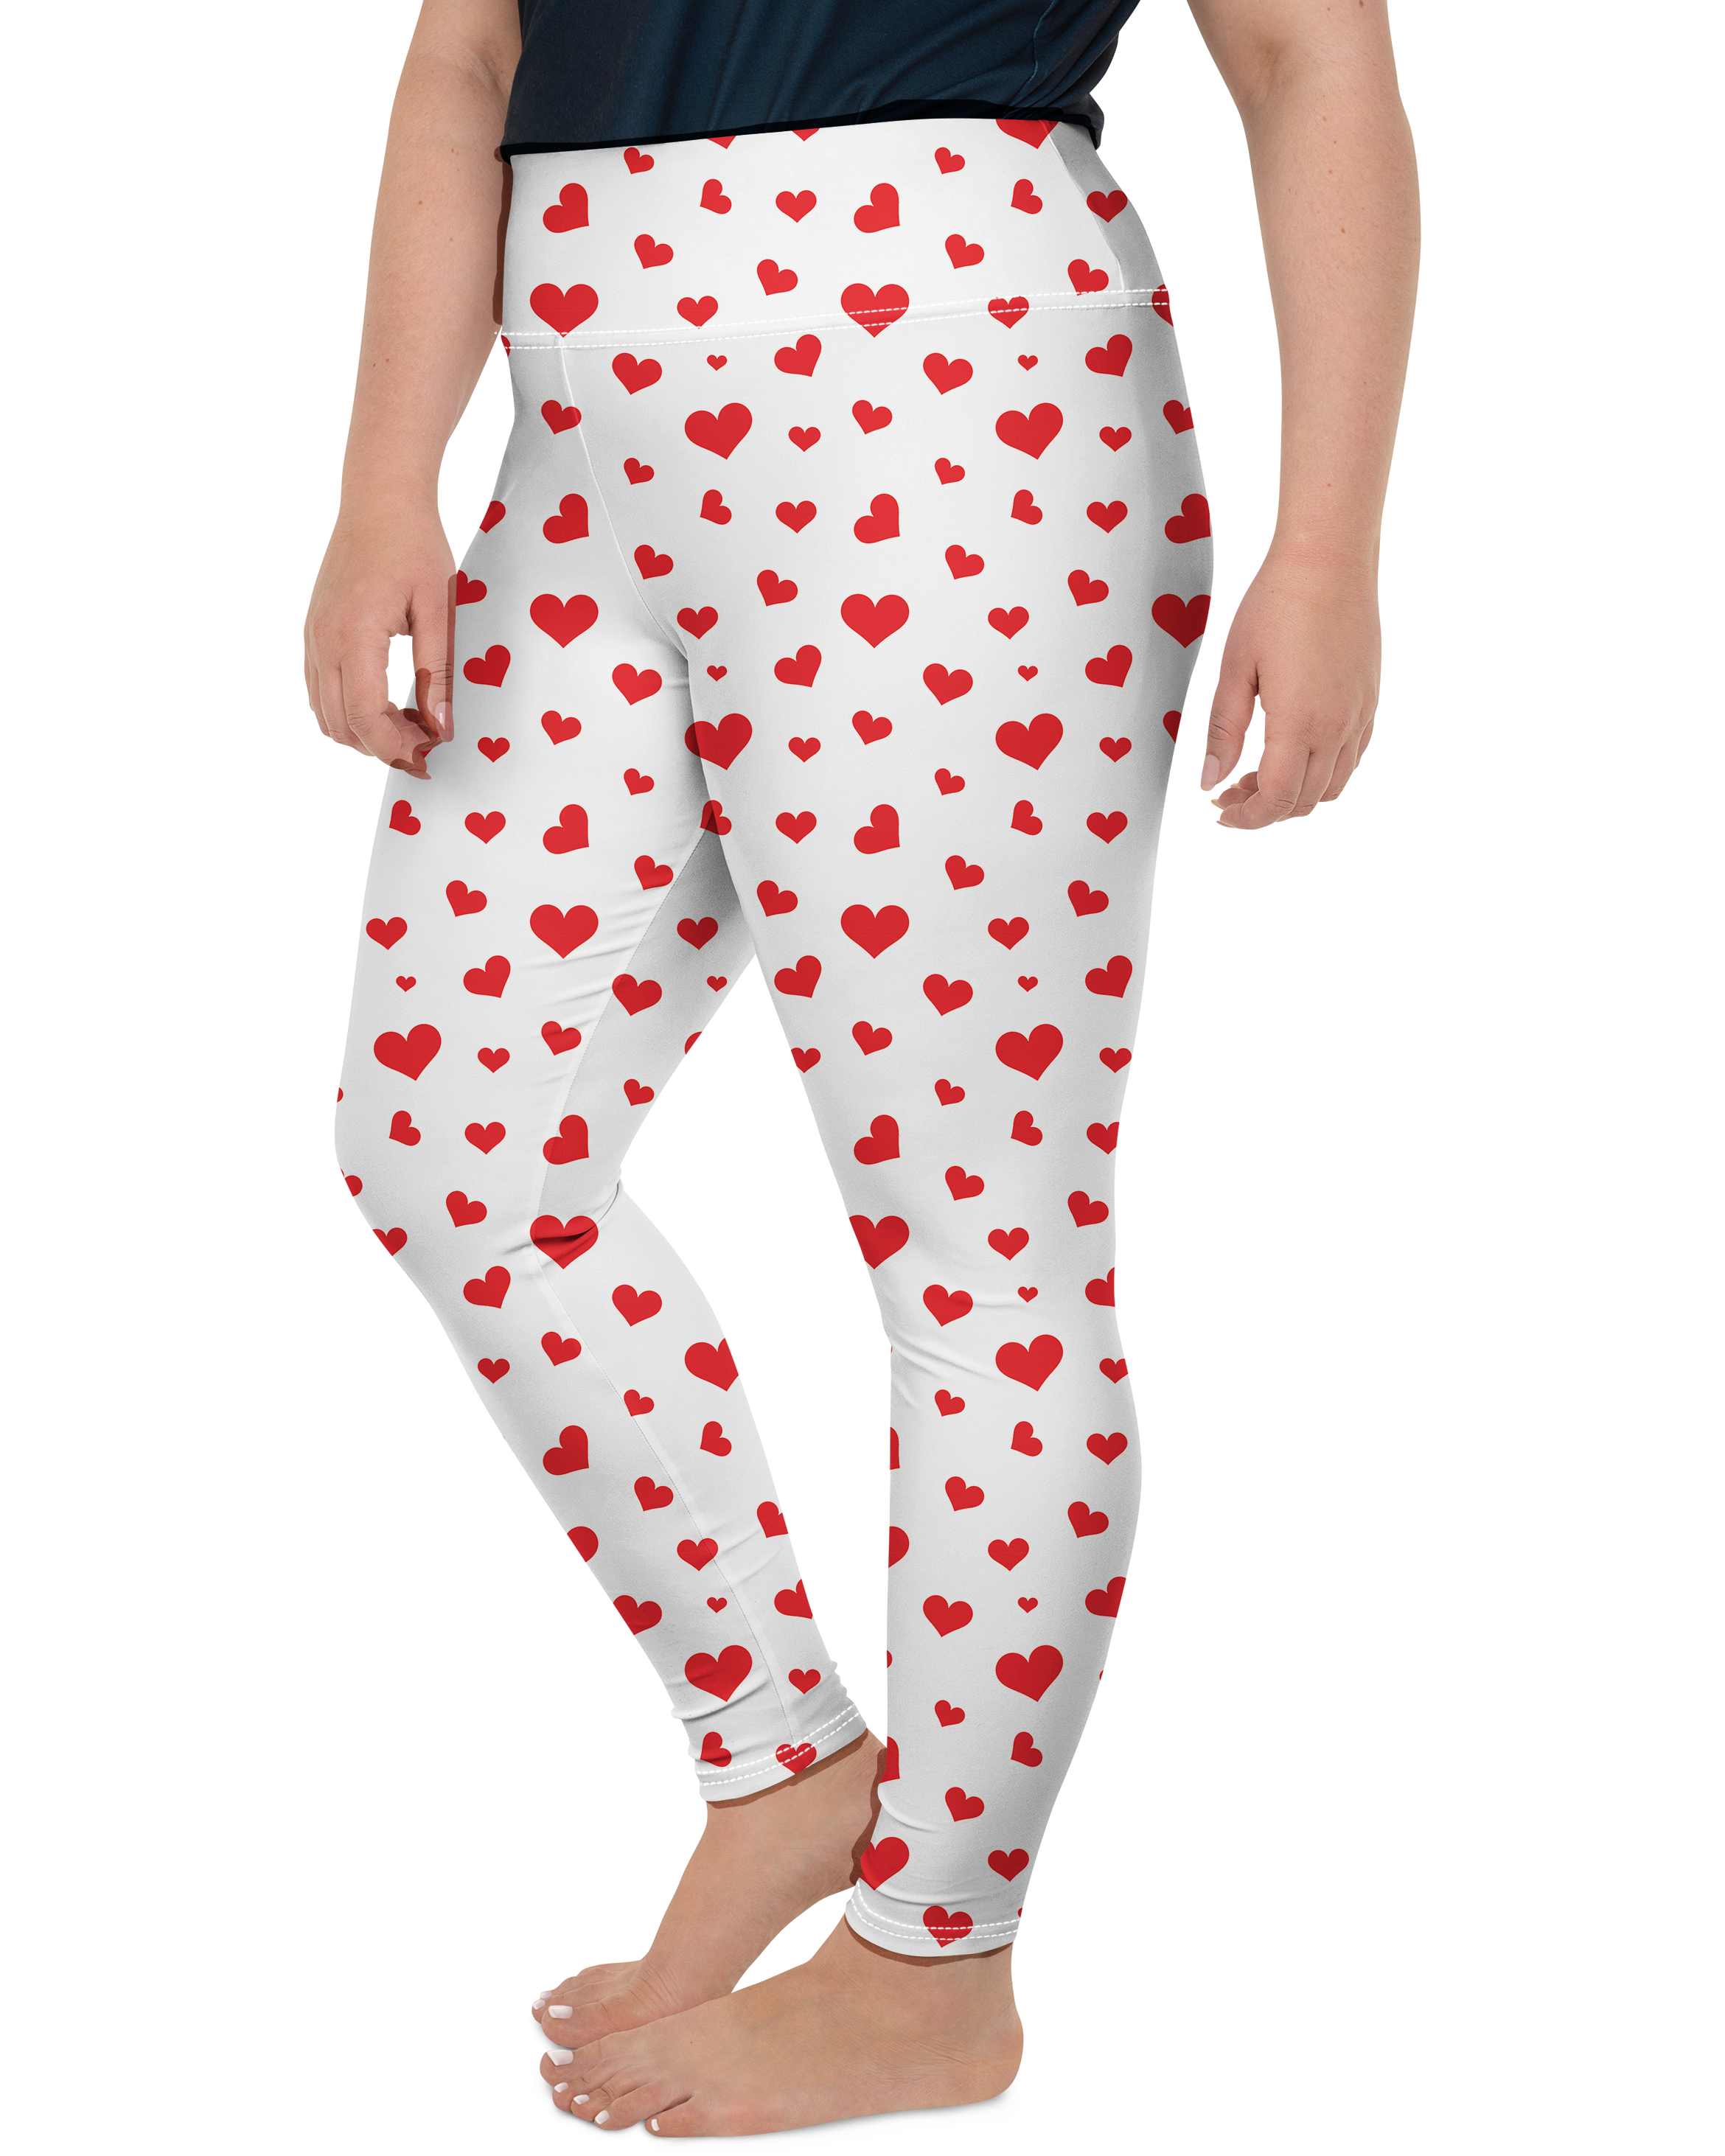 Red Hearts Plus Size Leggings